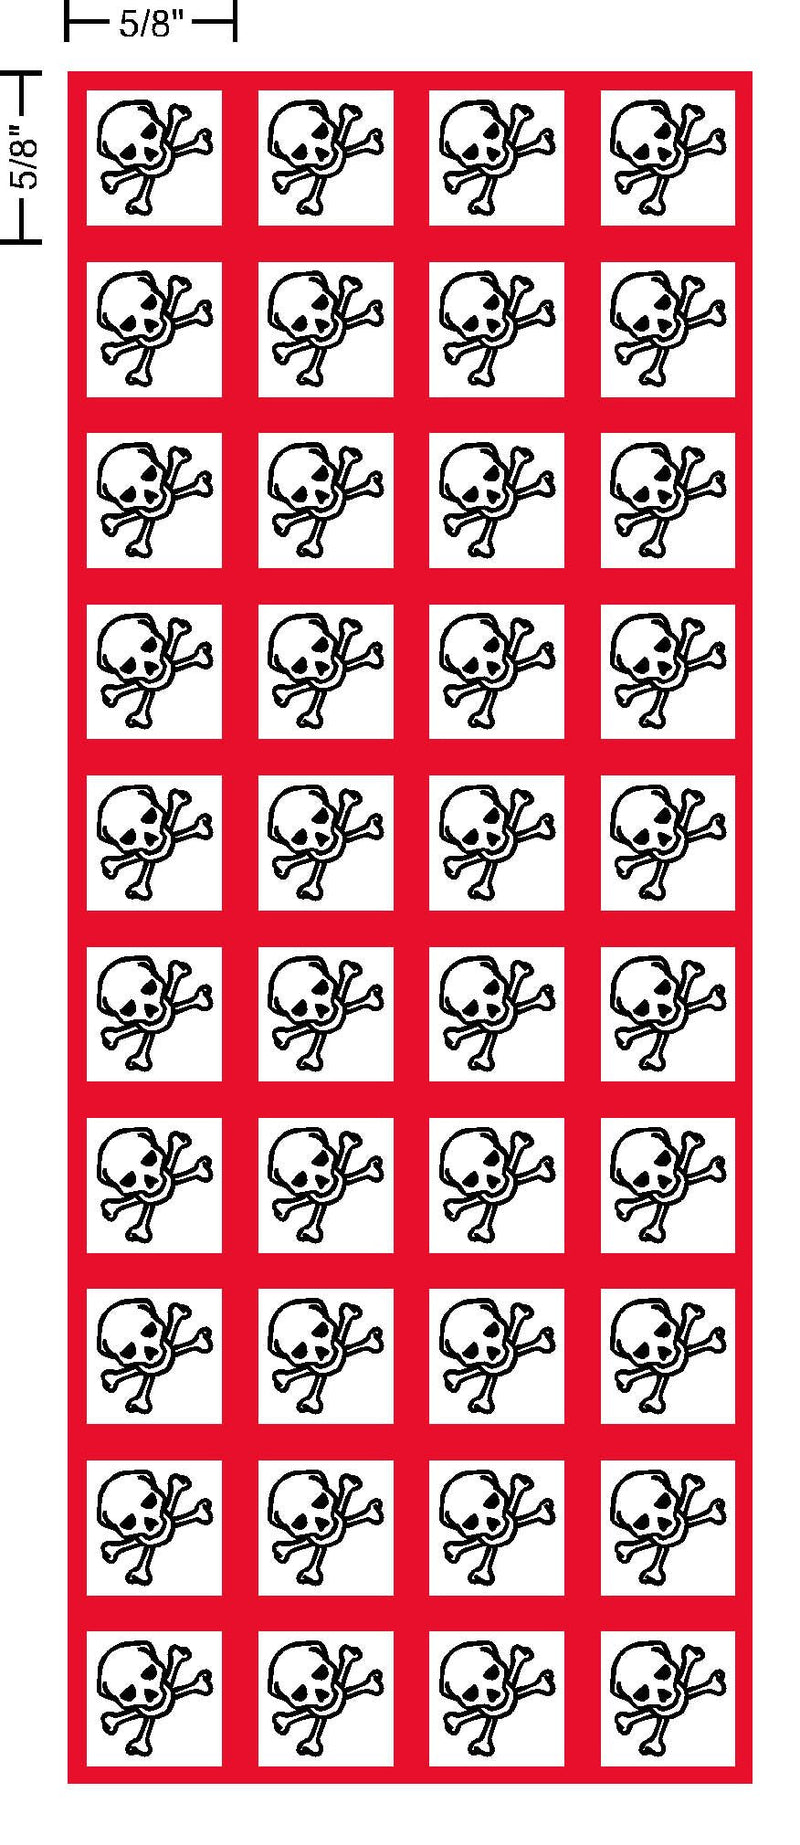 [Australia - AusPower] - GHS Toxic, Skull, Skull and Crossbones, Pictogram, 5/8 inch, .625 inch Sides, Decal, Label, kit OSHA Compliant, Vinyl Sticker, Sheet, 40 of The Decals per Sheet 